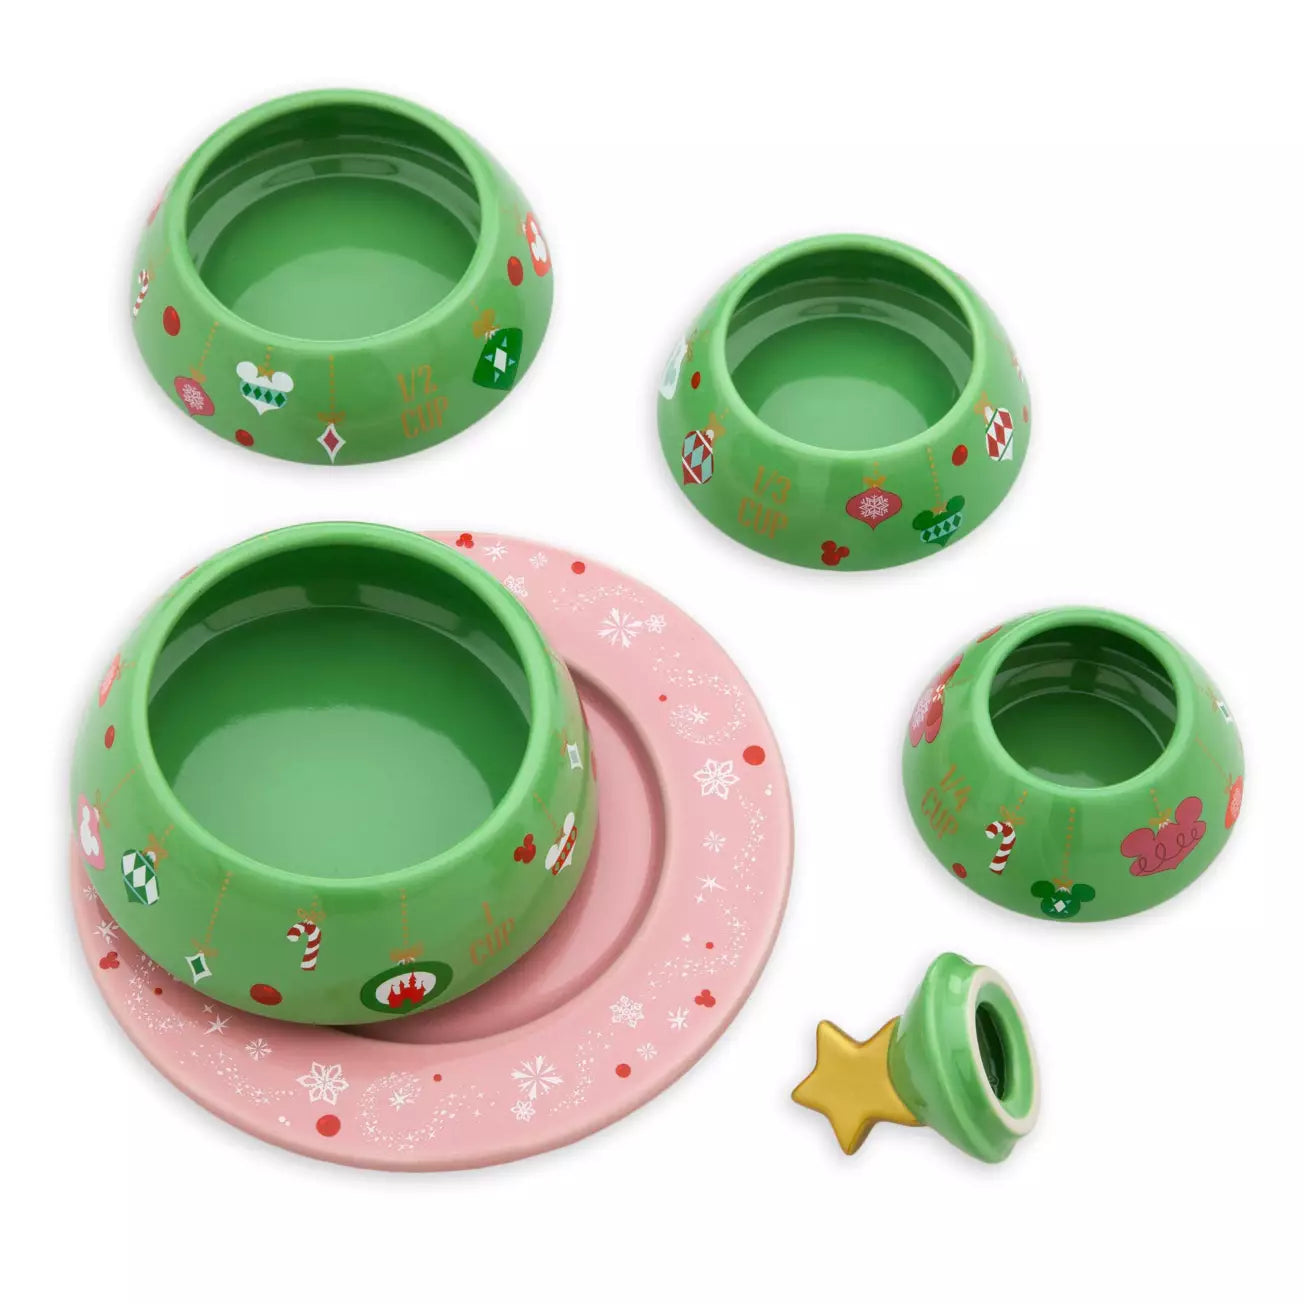 “Pre-order” HKDL - Mickey and Minnie Mouse Icon Holiday Ceramic Measuring Cup Set